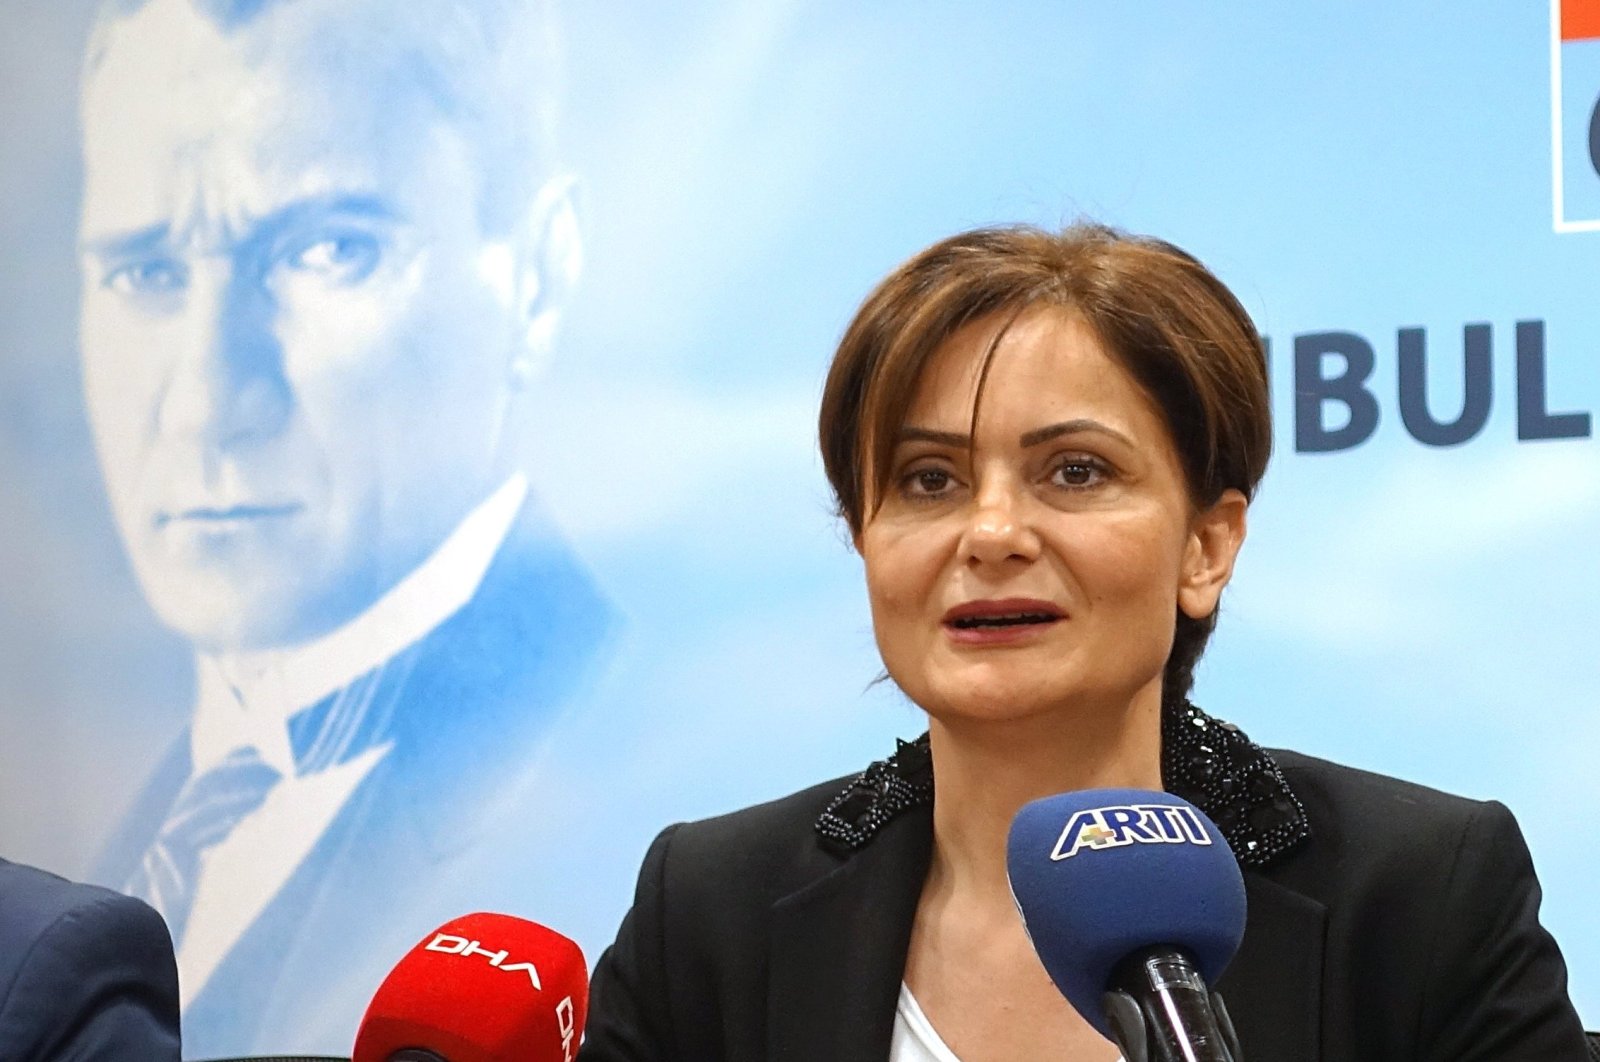 Canan Kaftancıoğlu, the main opposition Republican People’s Party (CHP) Istanbul head, speaks during a press conference in Istanbul, Turkey, May 22, 2019. (AA Photo)